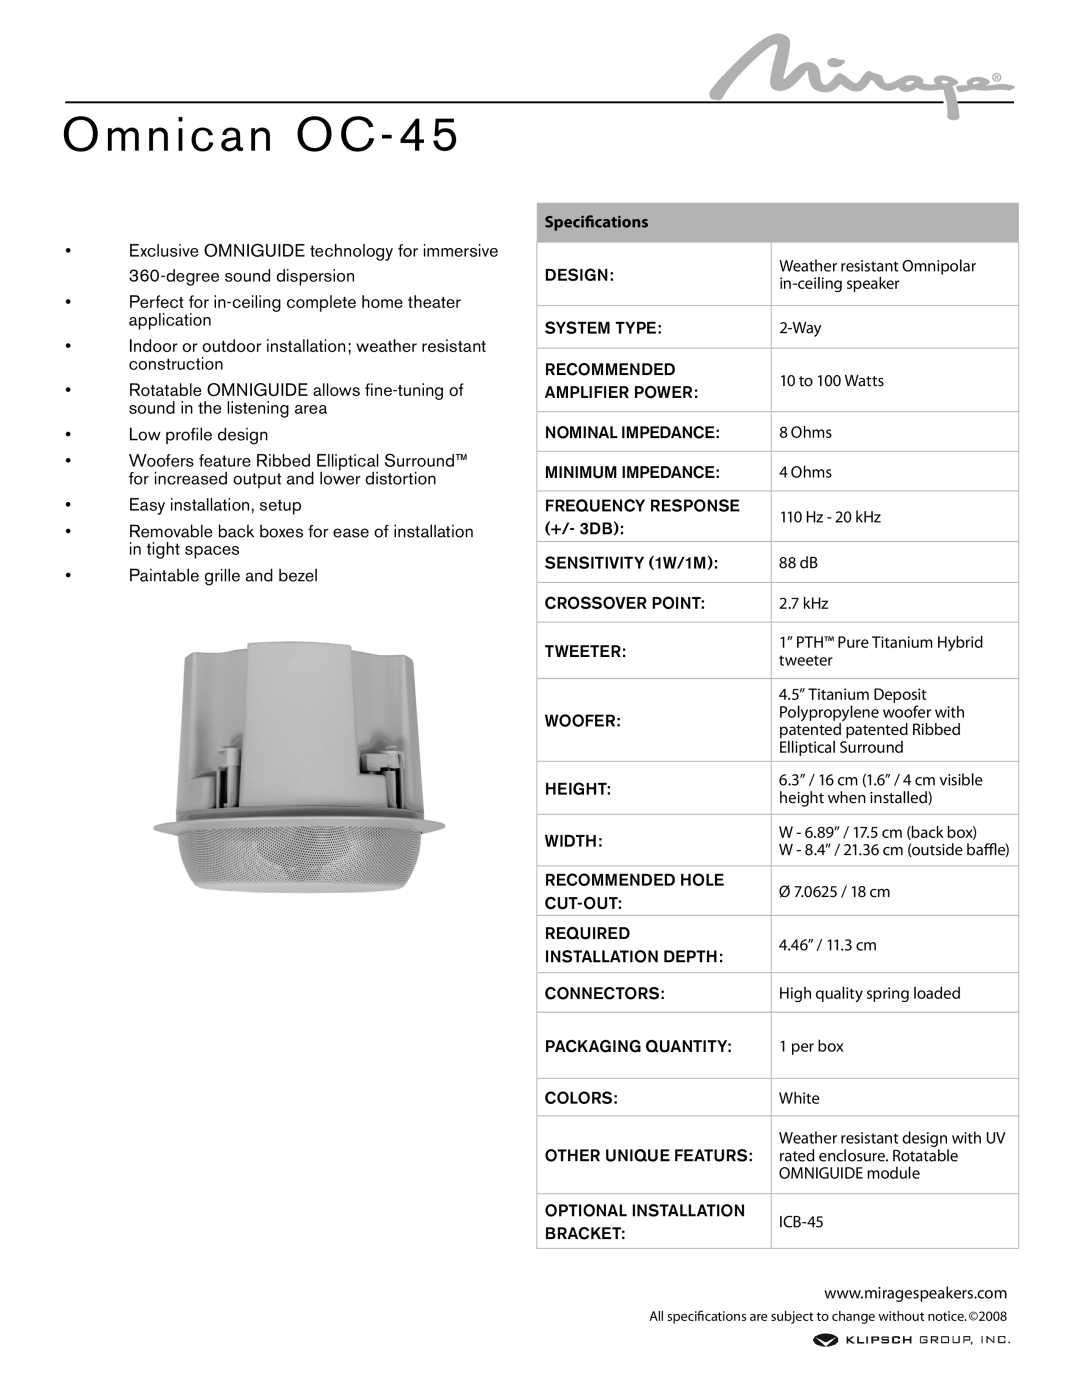 Mirage Loudspeakers OC-45 specifications Omnican OC, Specifications 